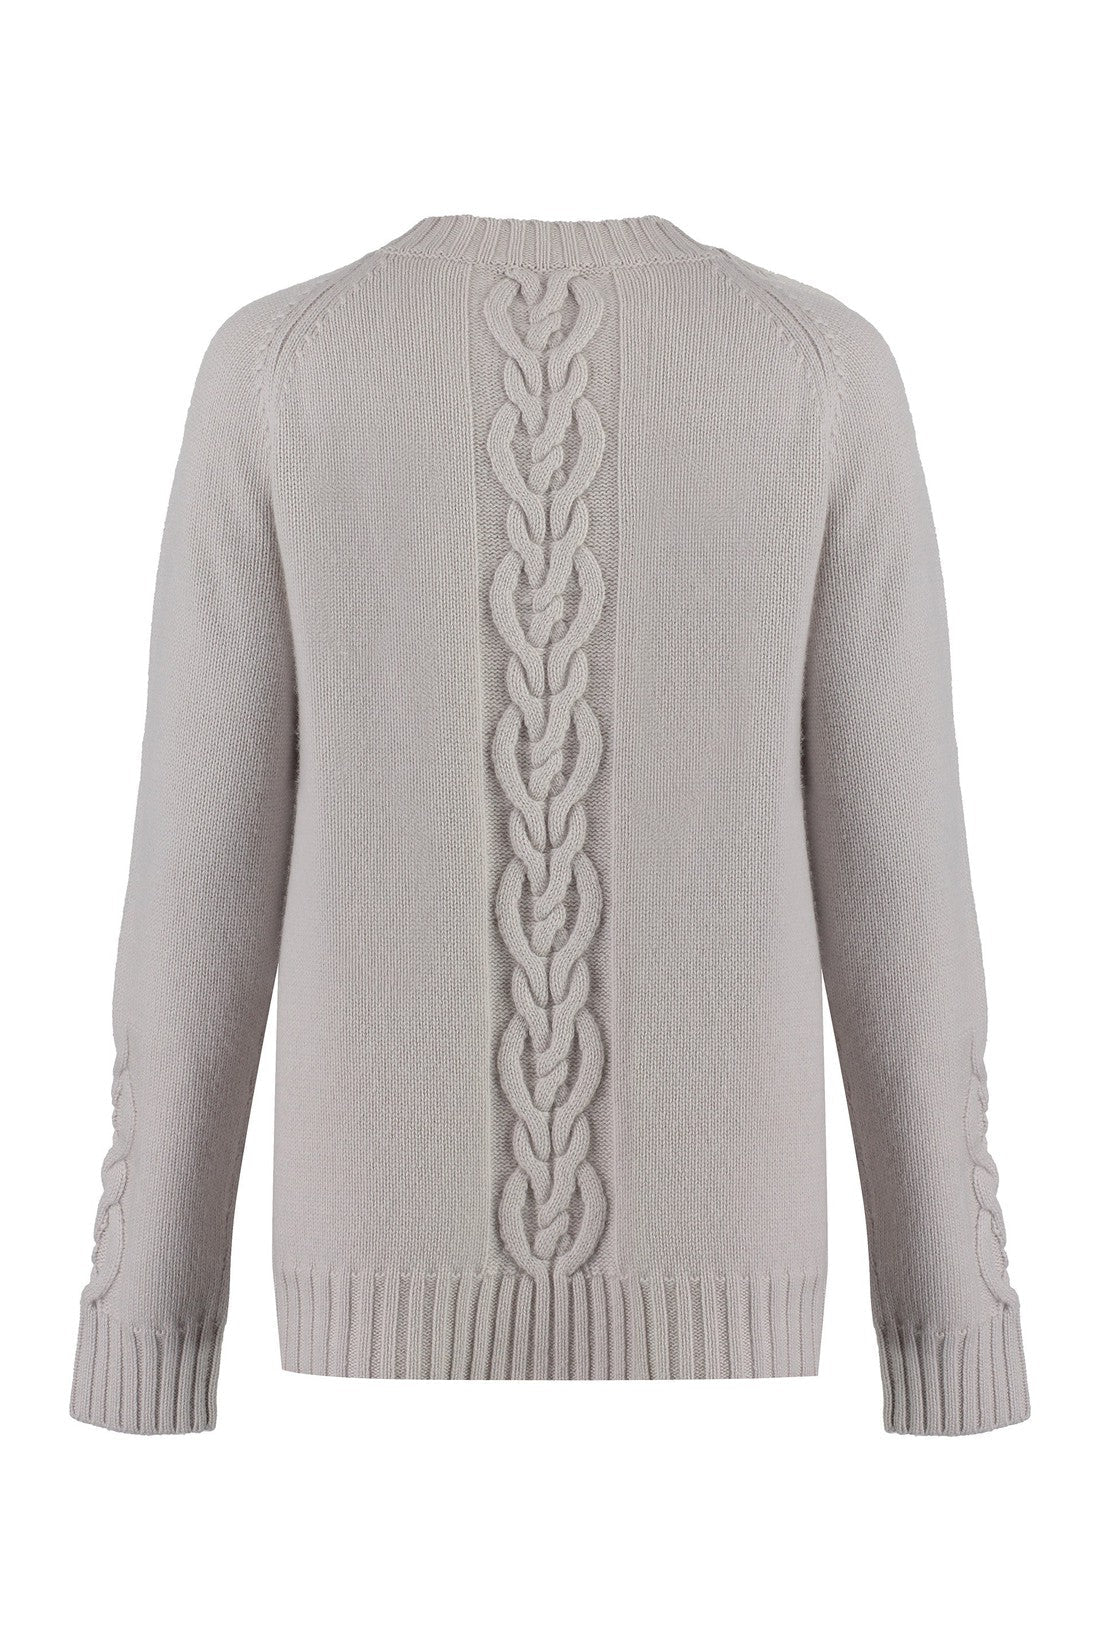 S MAX MARA-OUTLET-SALE-Ginny wool-blend crew-neck sweater-ARCHIVIST